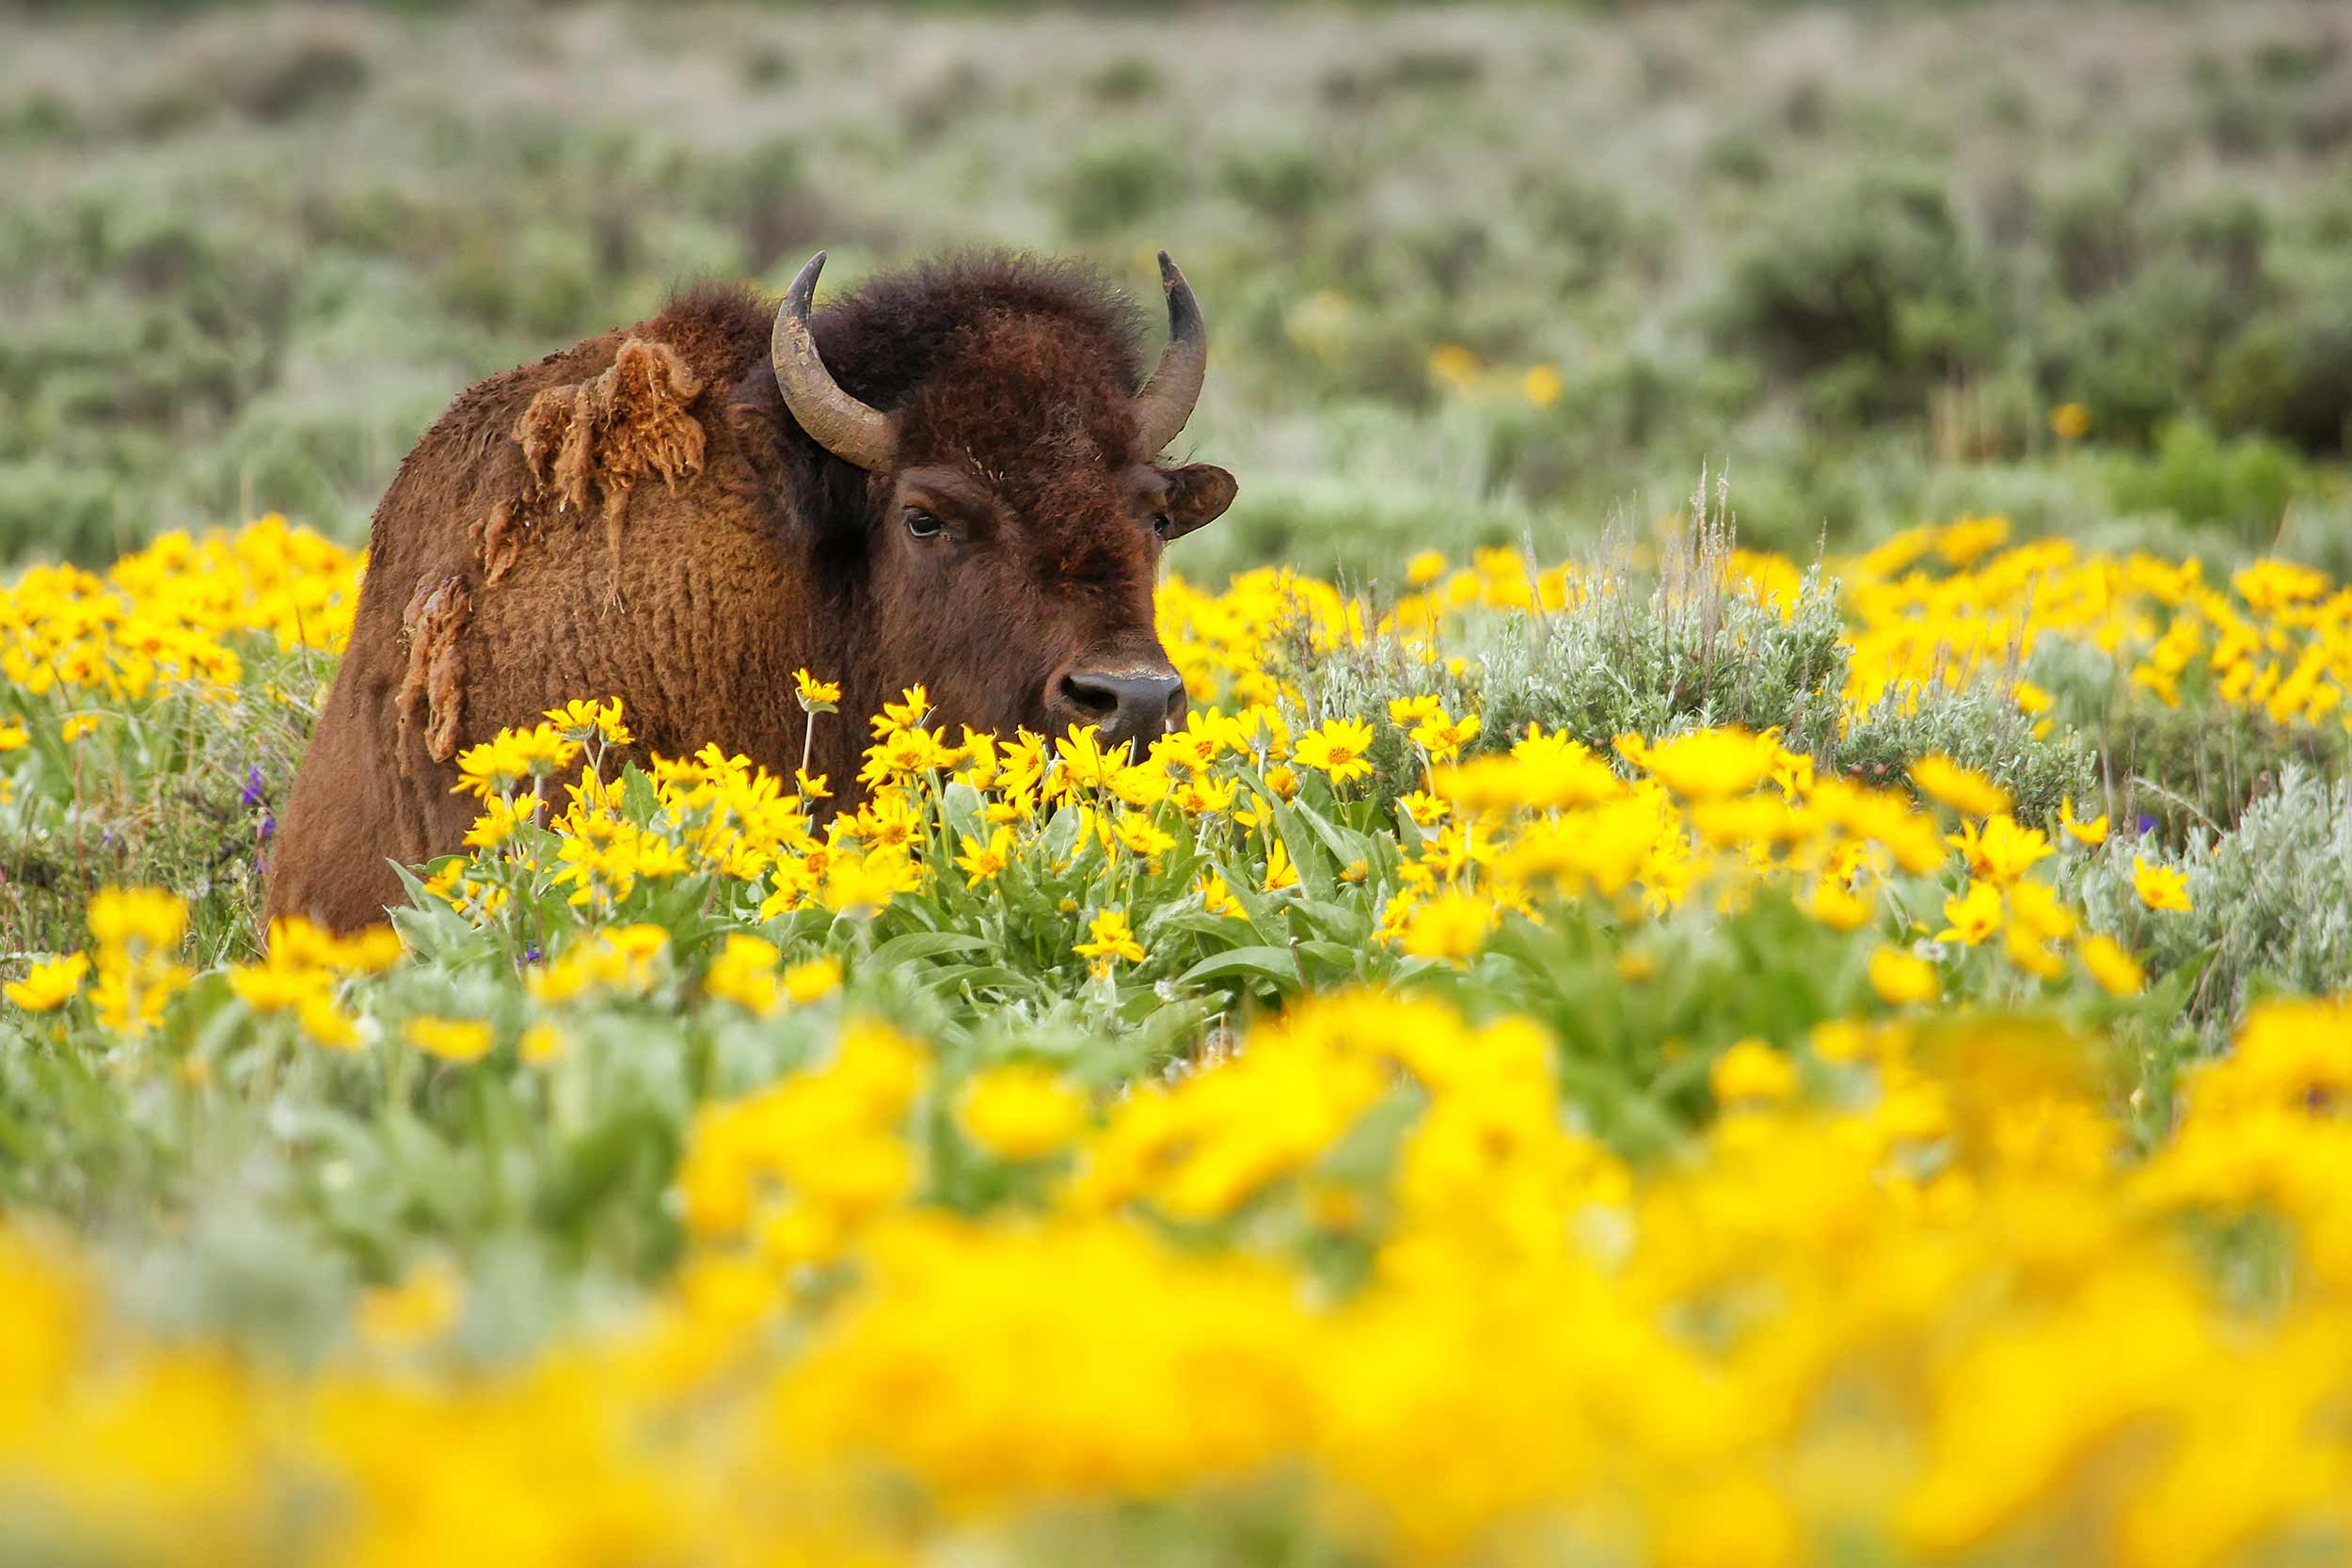 Male bison lying in the field with flowers, Yellowstone National Park, Wyoming